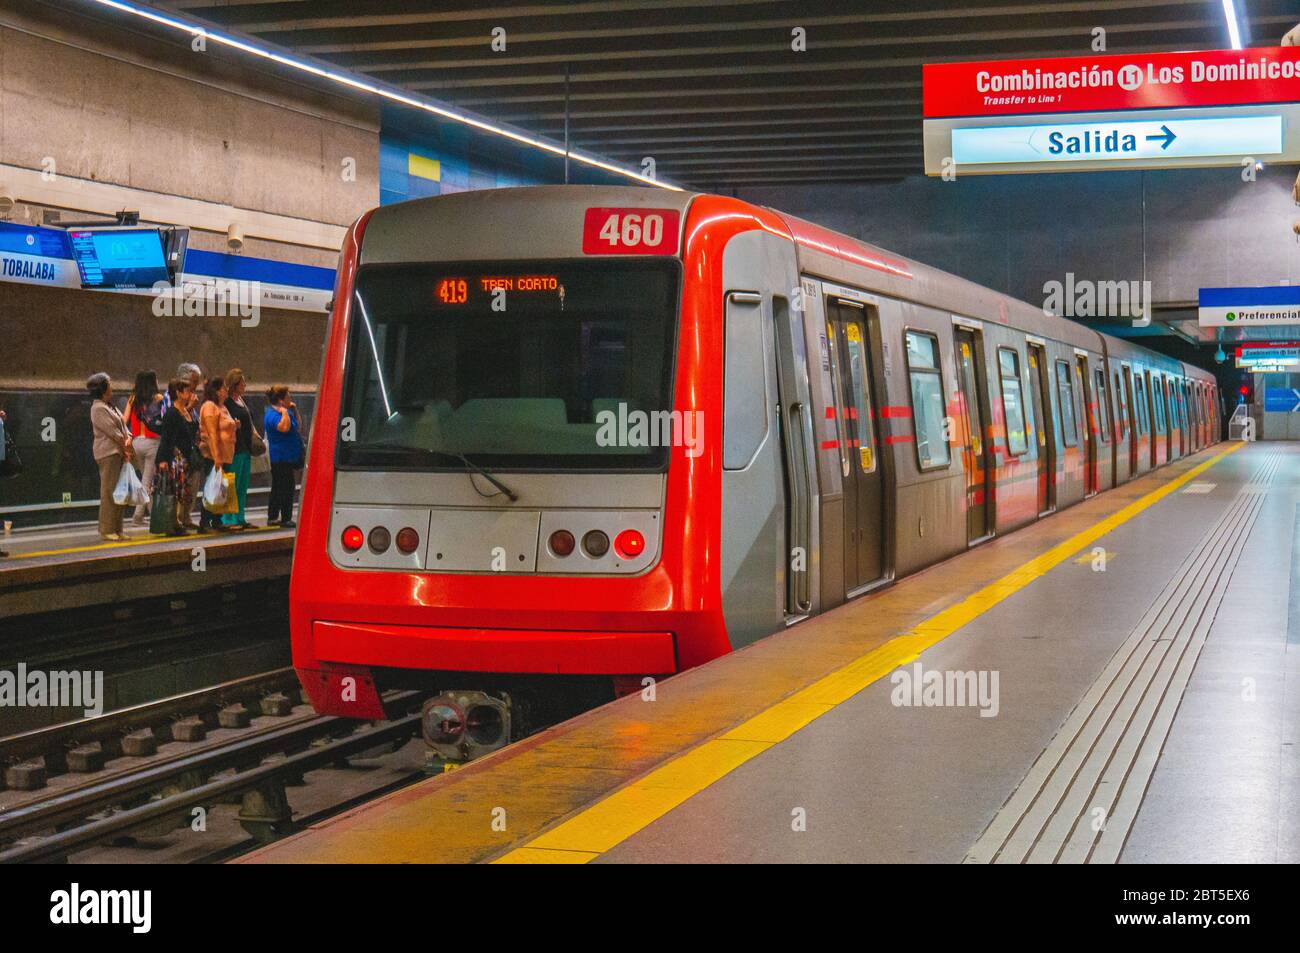 SANTIAGO, CHILE - JANUARY 2016: A public transport train at Tobalaba station of L4 Stock Photo